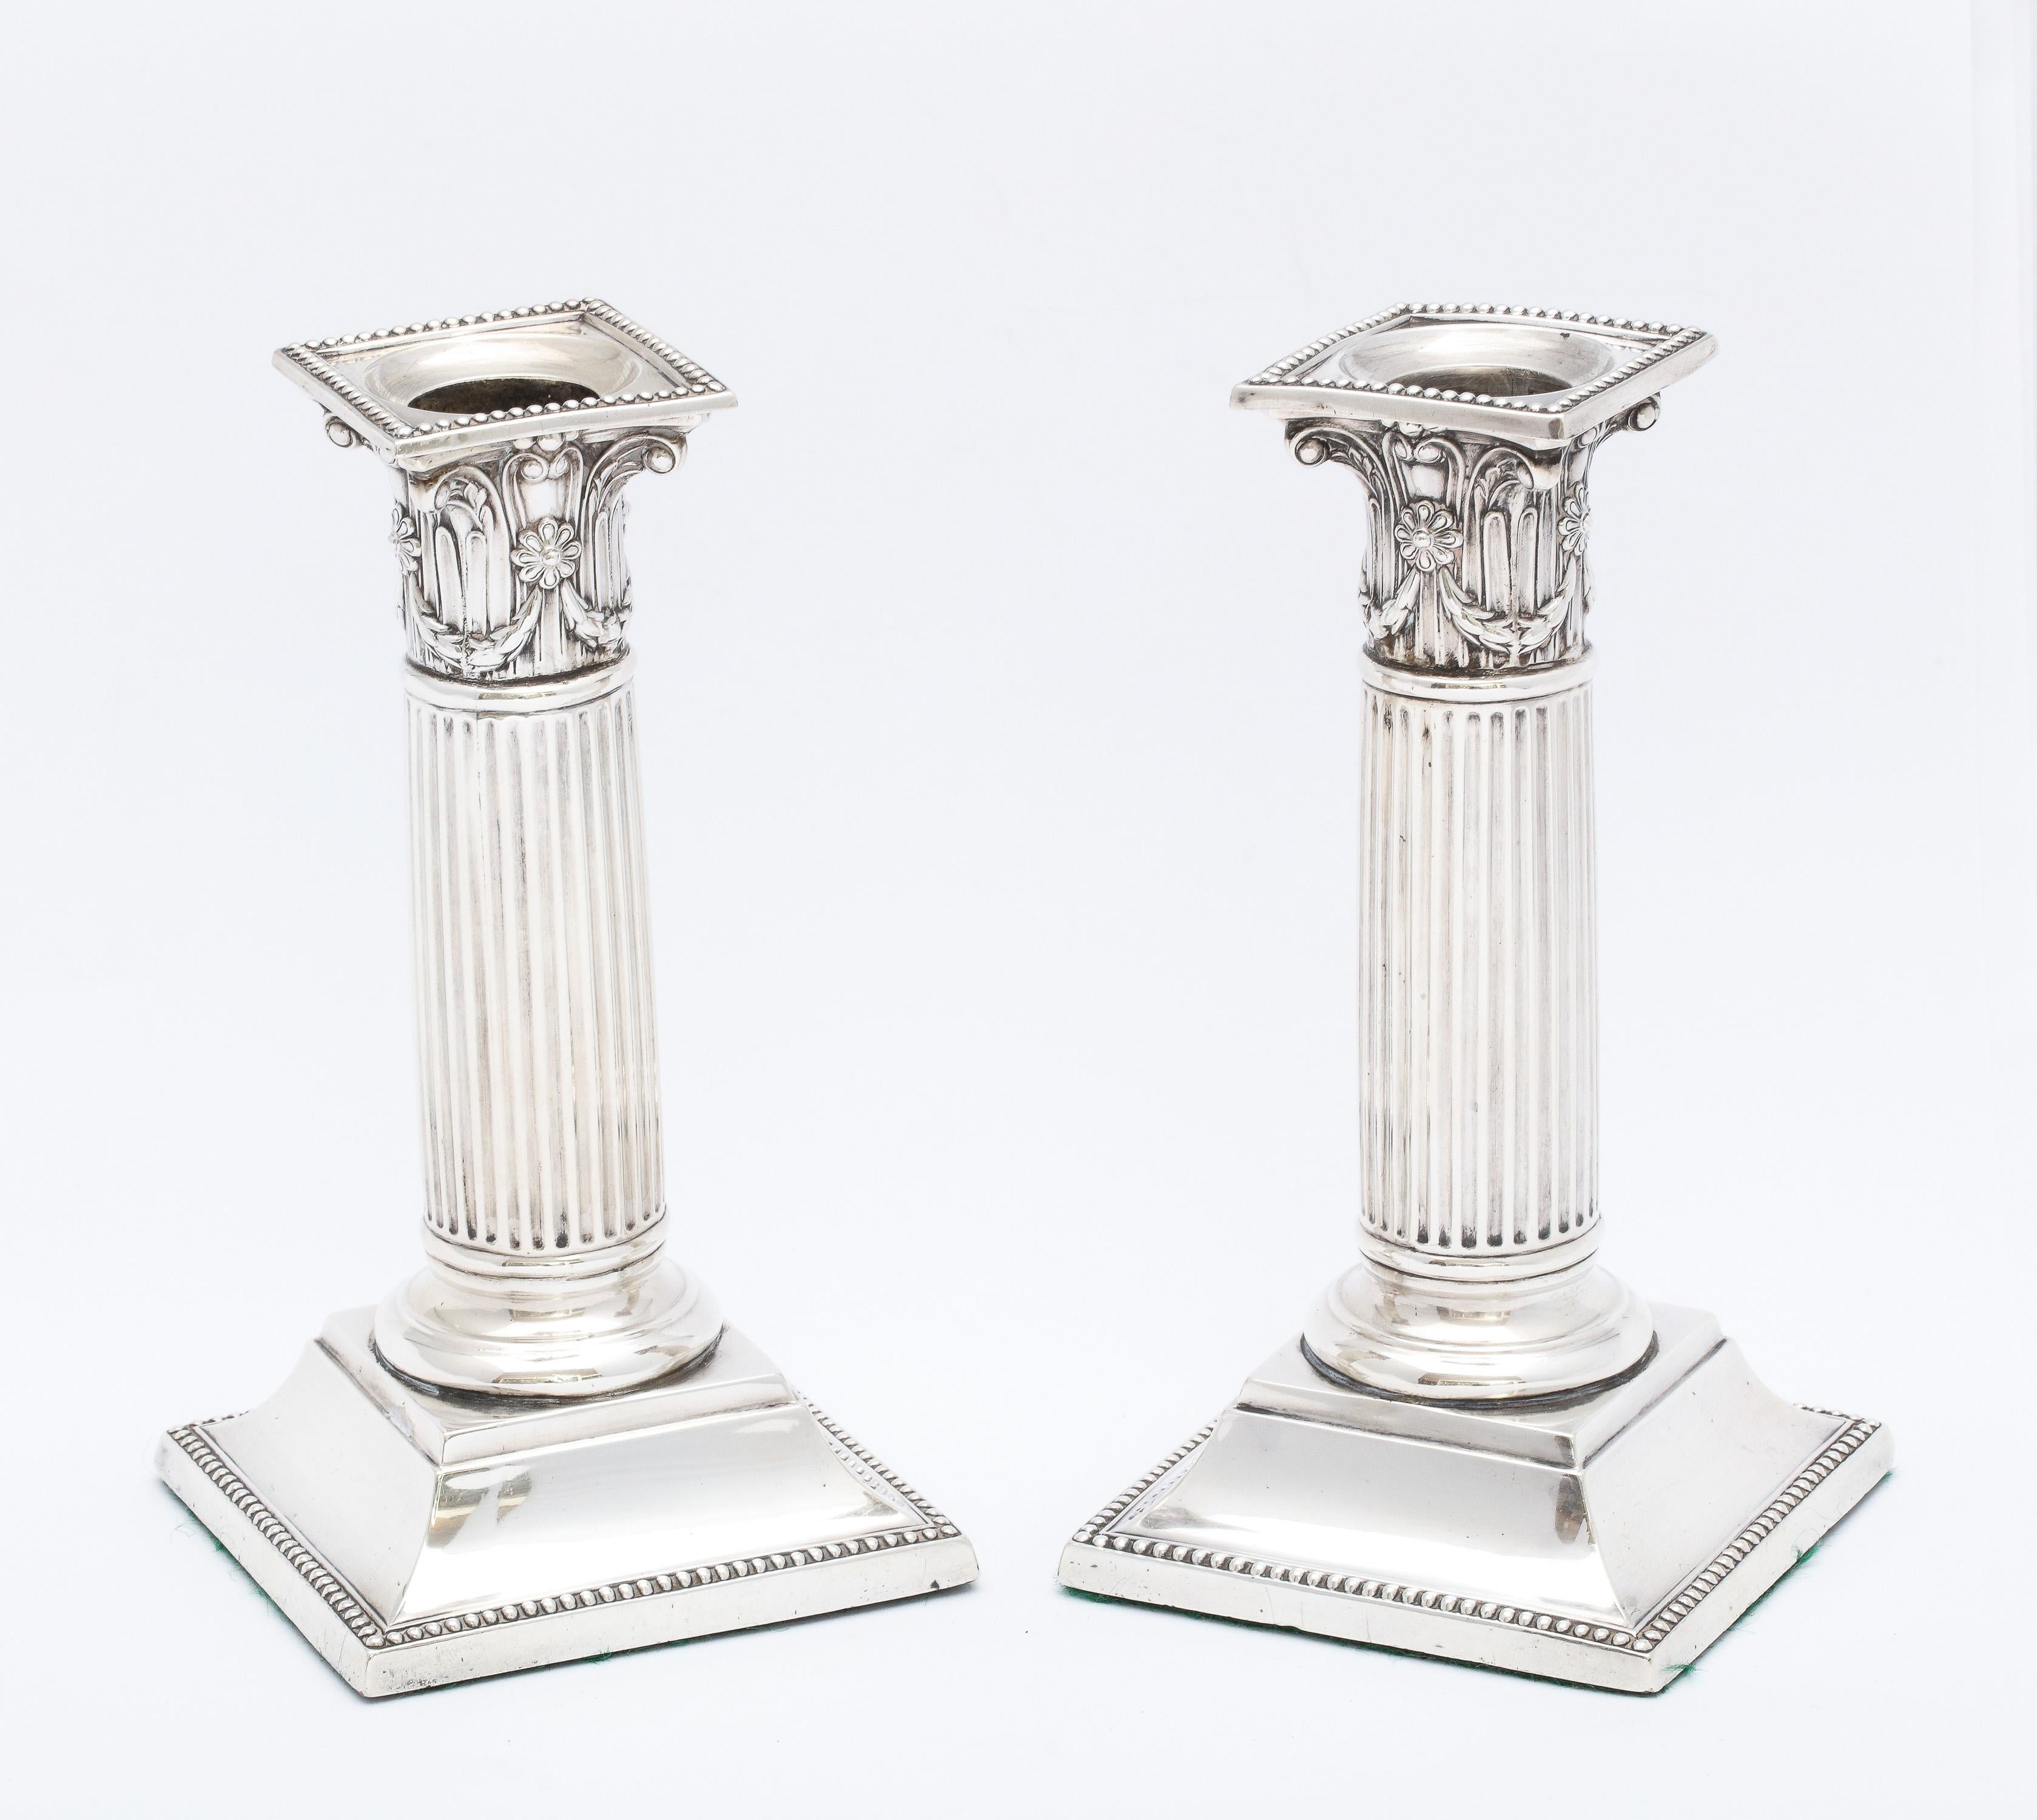 Neoclassical Style, Victorian Period, sterling silver Corinthian column candlesticks, Birmingham, England, year-hallmarked for 1889, Richard Martin and Ebenezer Hall (doing business as Martin and Hall) - makers.  Capital of each candlestick's column